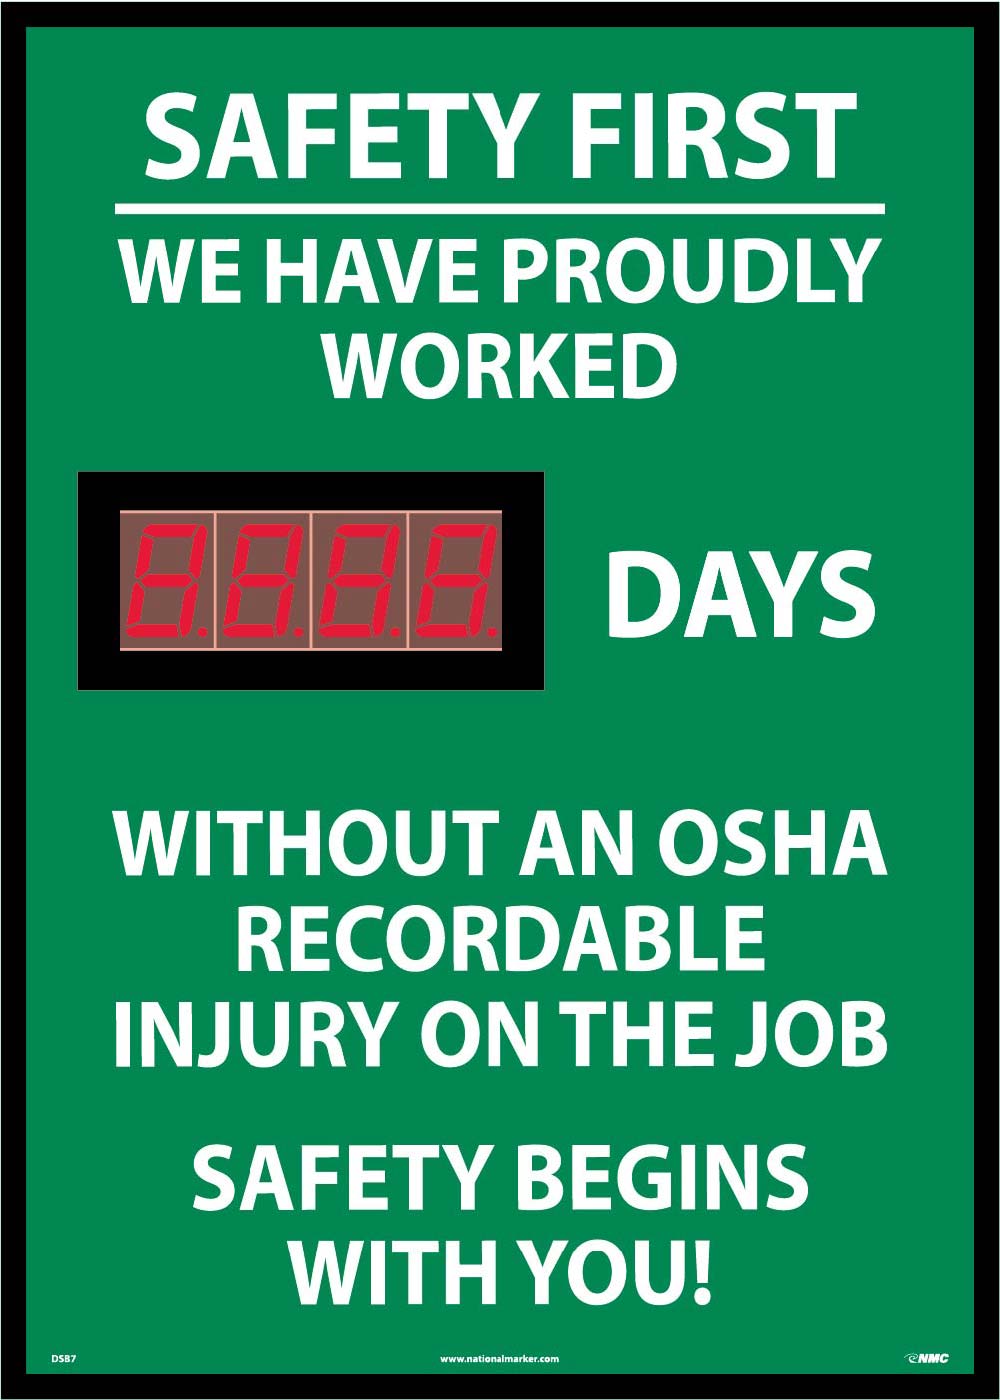 Safety First We Have Proudly Worked Digital Scoreboard-eSafety Supplies, Inc